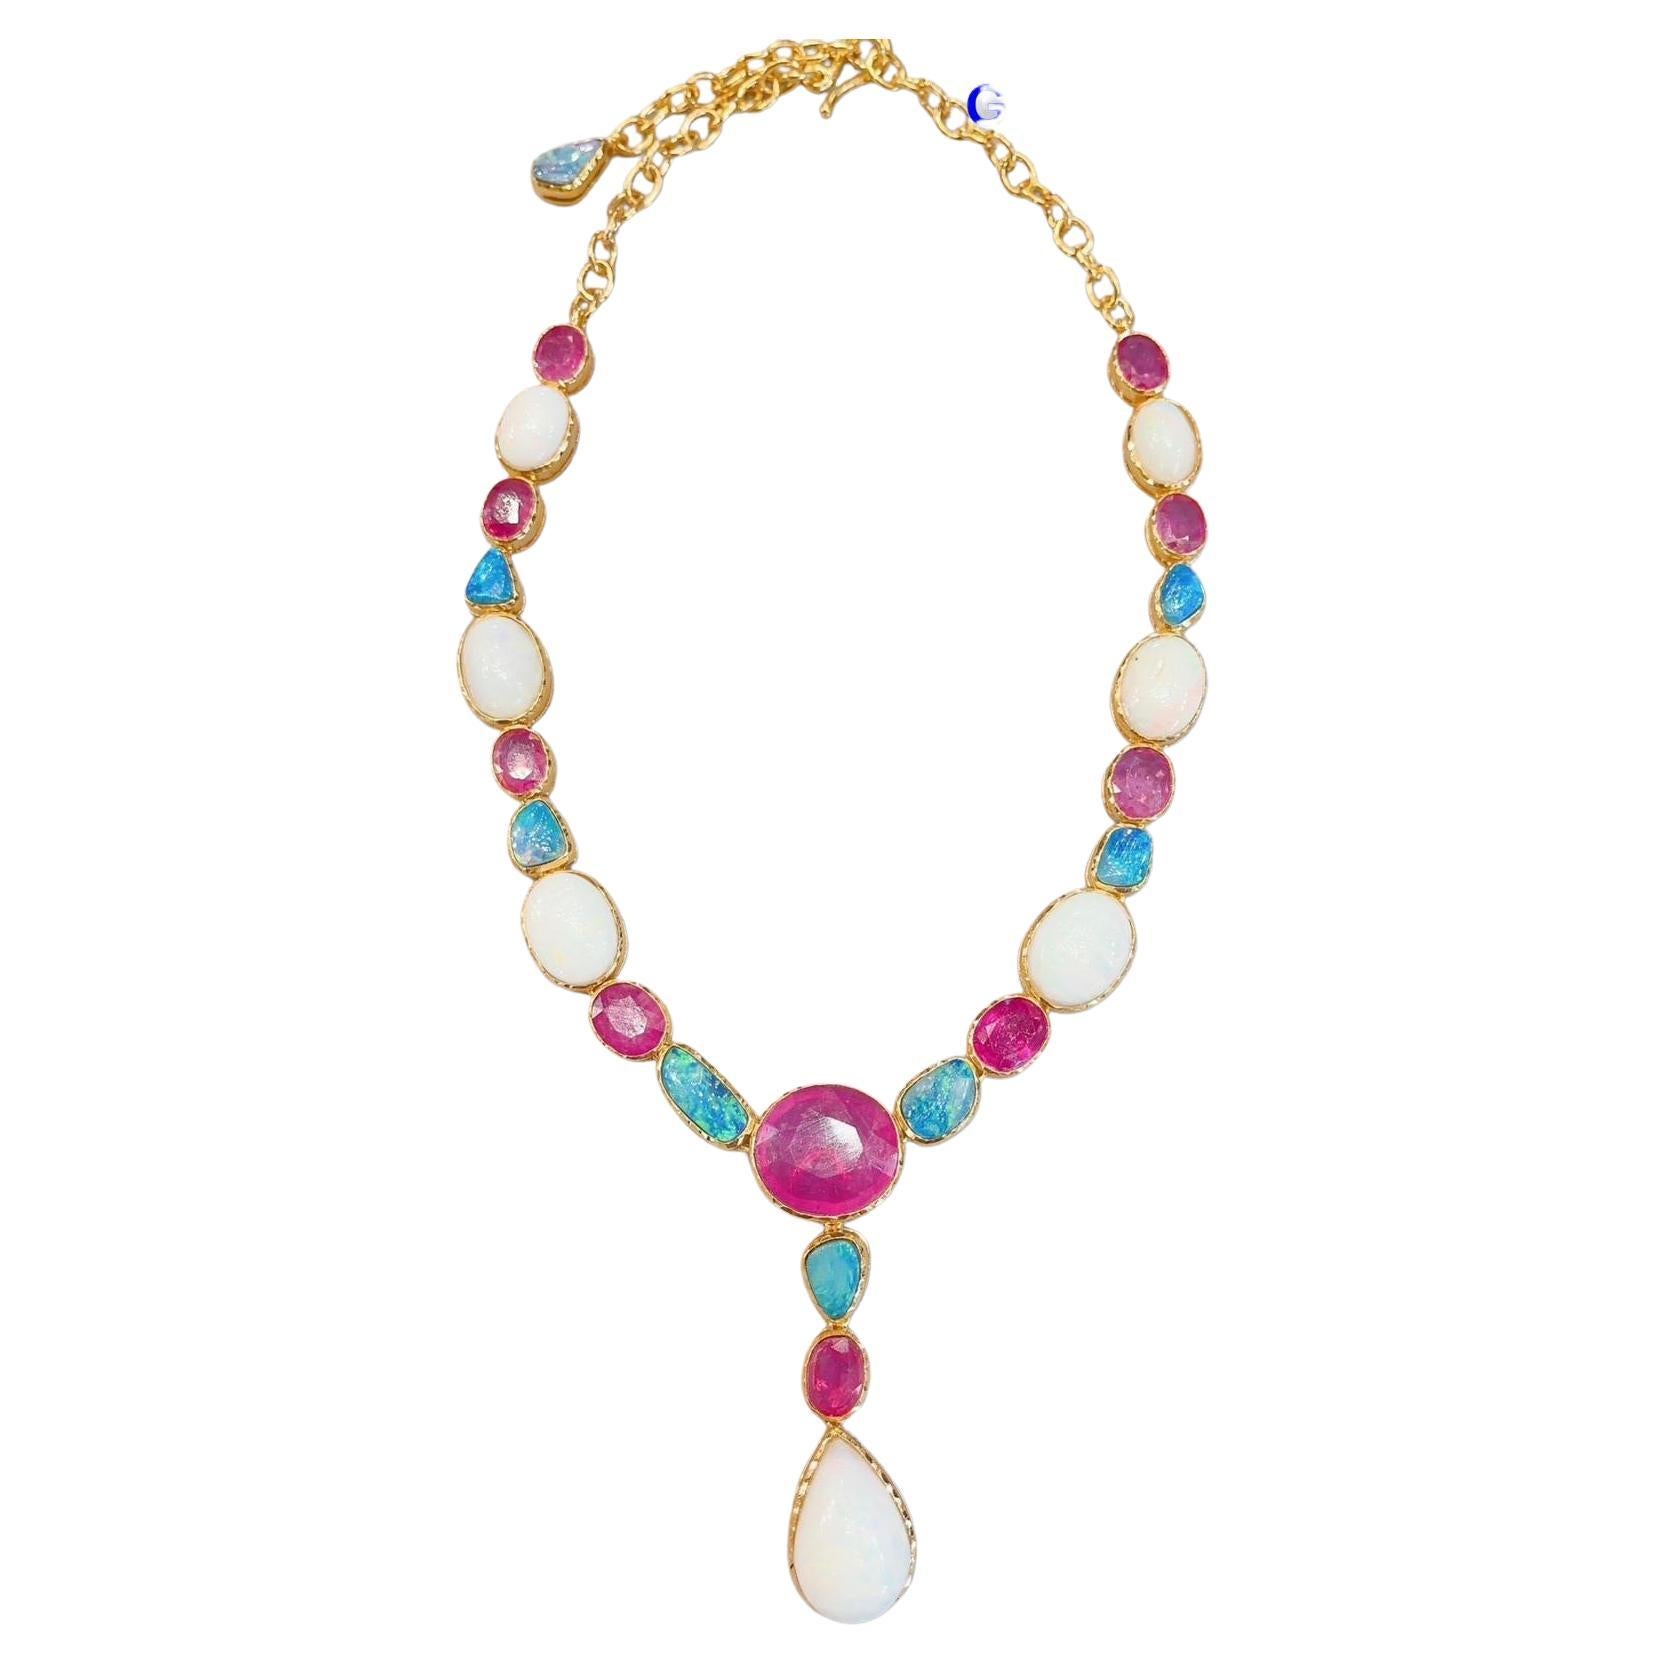 Bochic “Capri” Rich Multi Natural Gem Necklace & Earrings 
Necklace:
Natural Ruby, Colors - Red, Pink, 35 Carats 
Ethiopian White Opal and Australian Blue Opal, 34 Carats 
Set in 22K Gold and Silver 
Earrings:
Natural Ruby, Colors - Red, Pink, 7